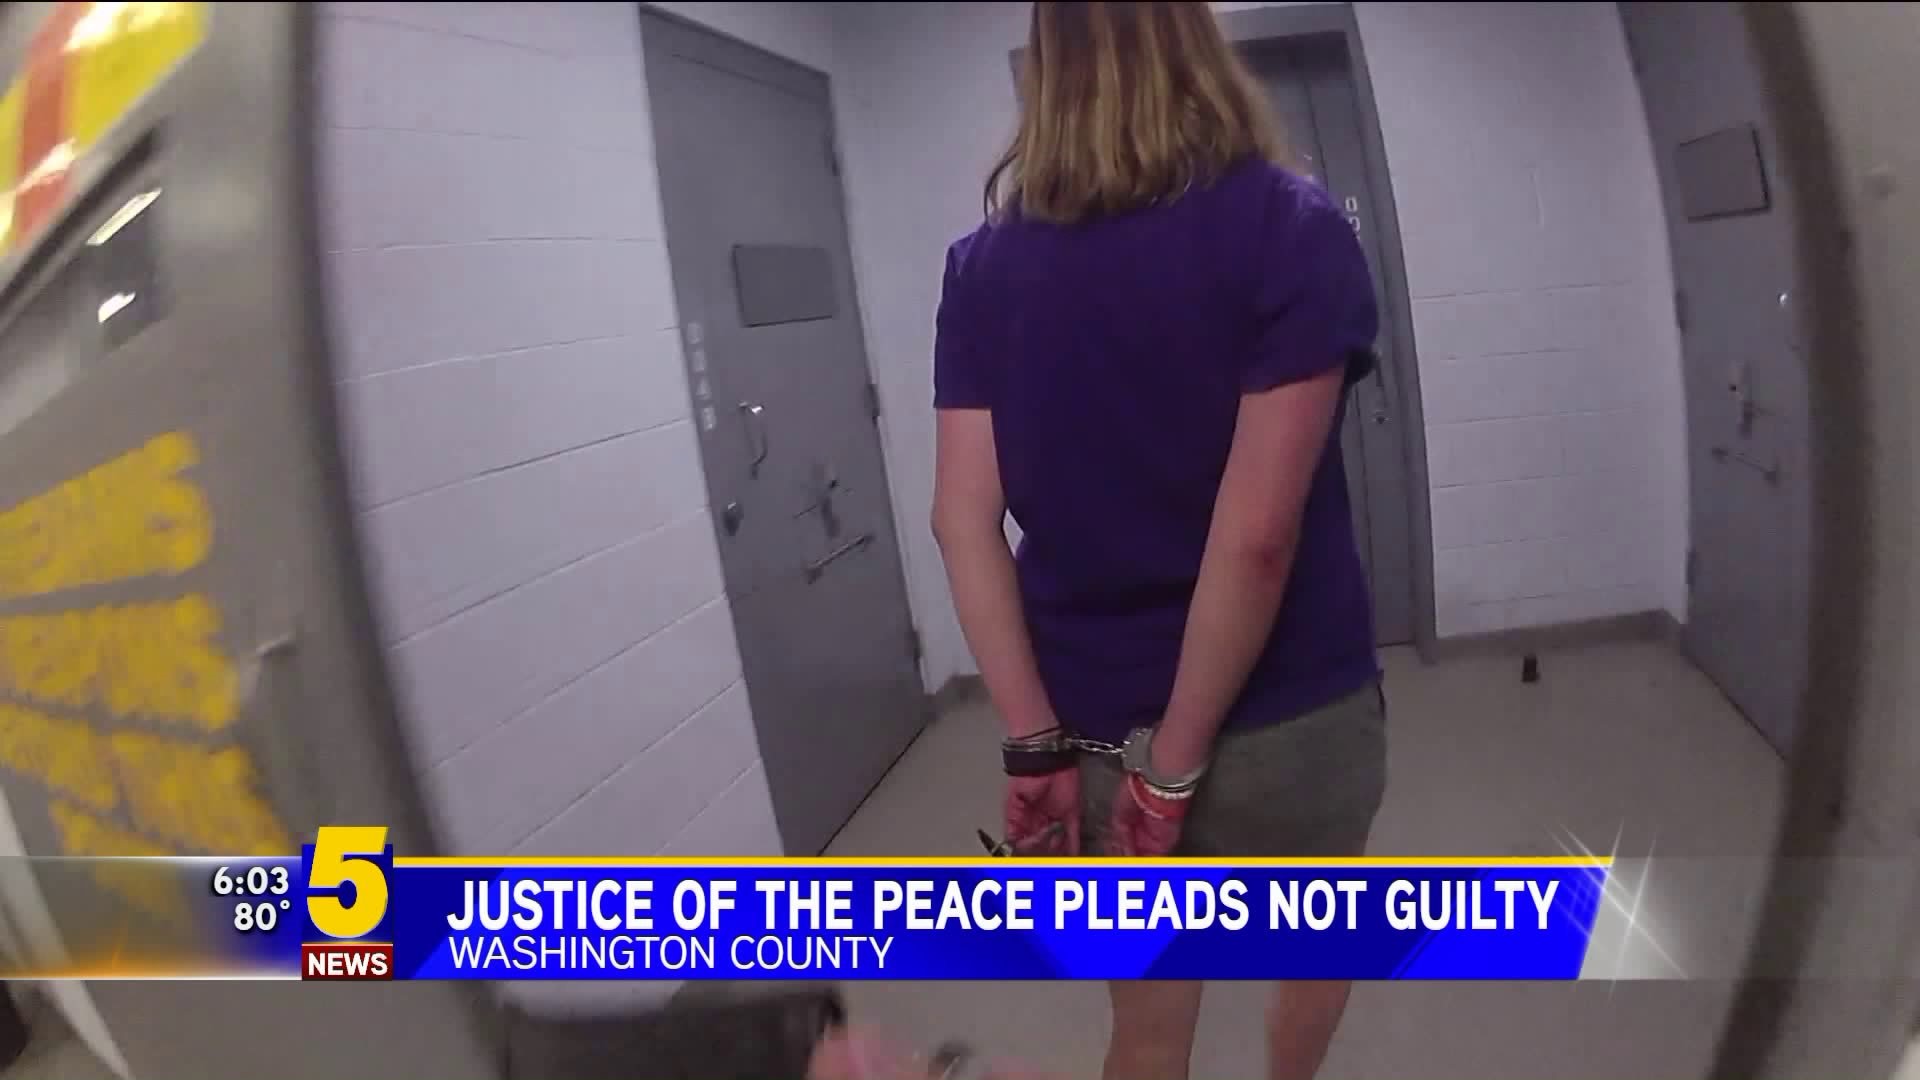 Washington County Justice of the Peace Pleads Not Guilty to DWI